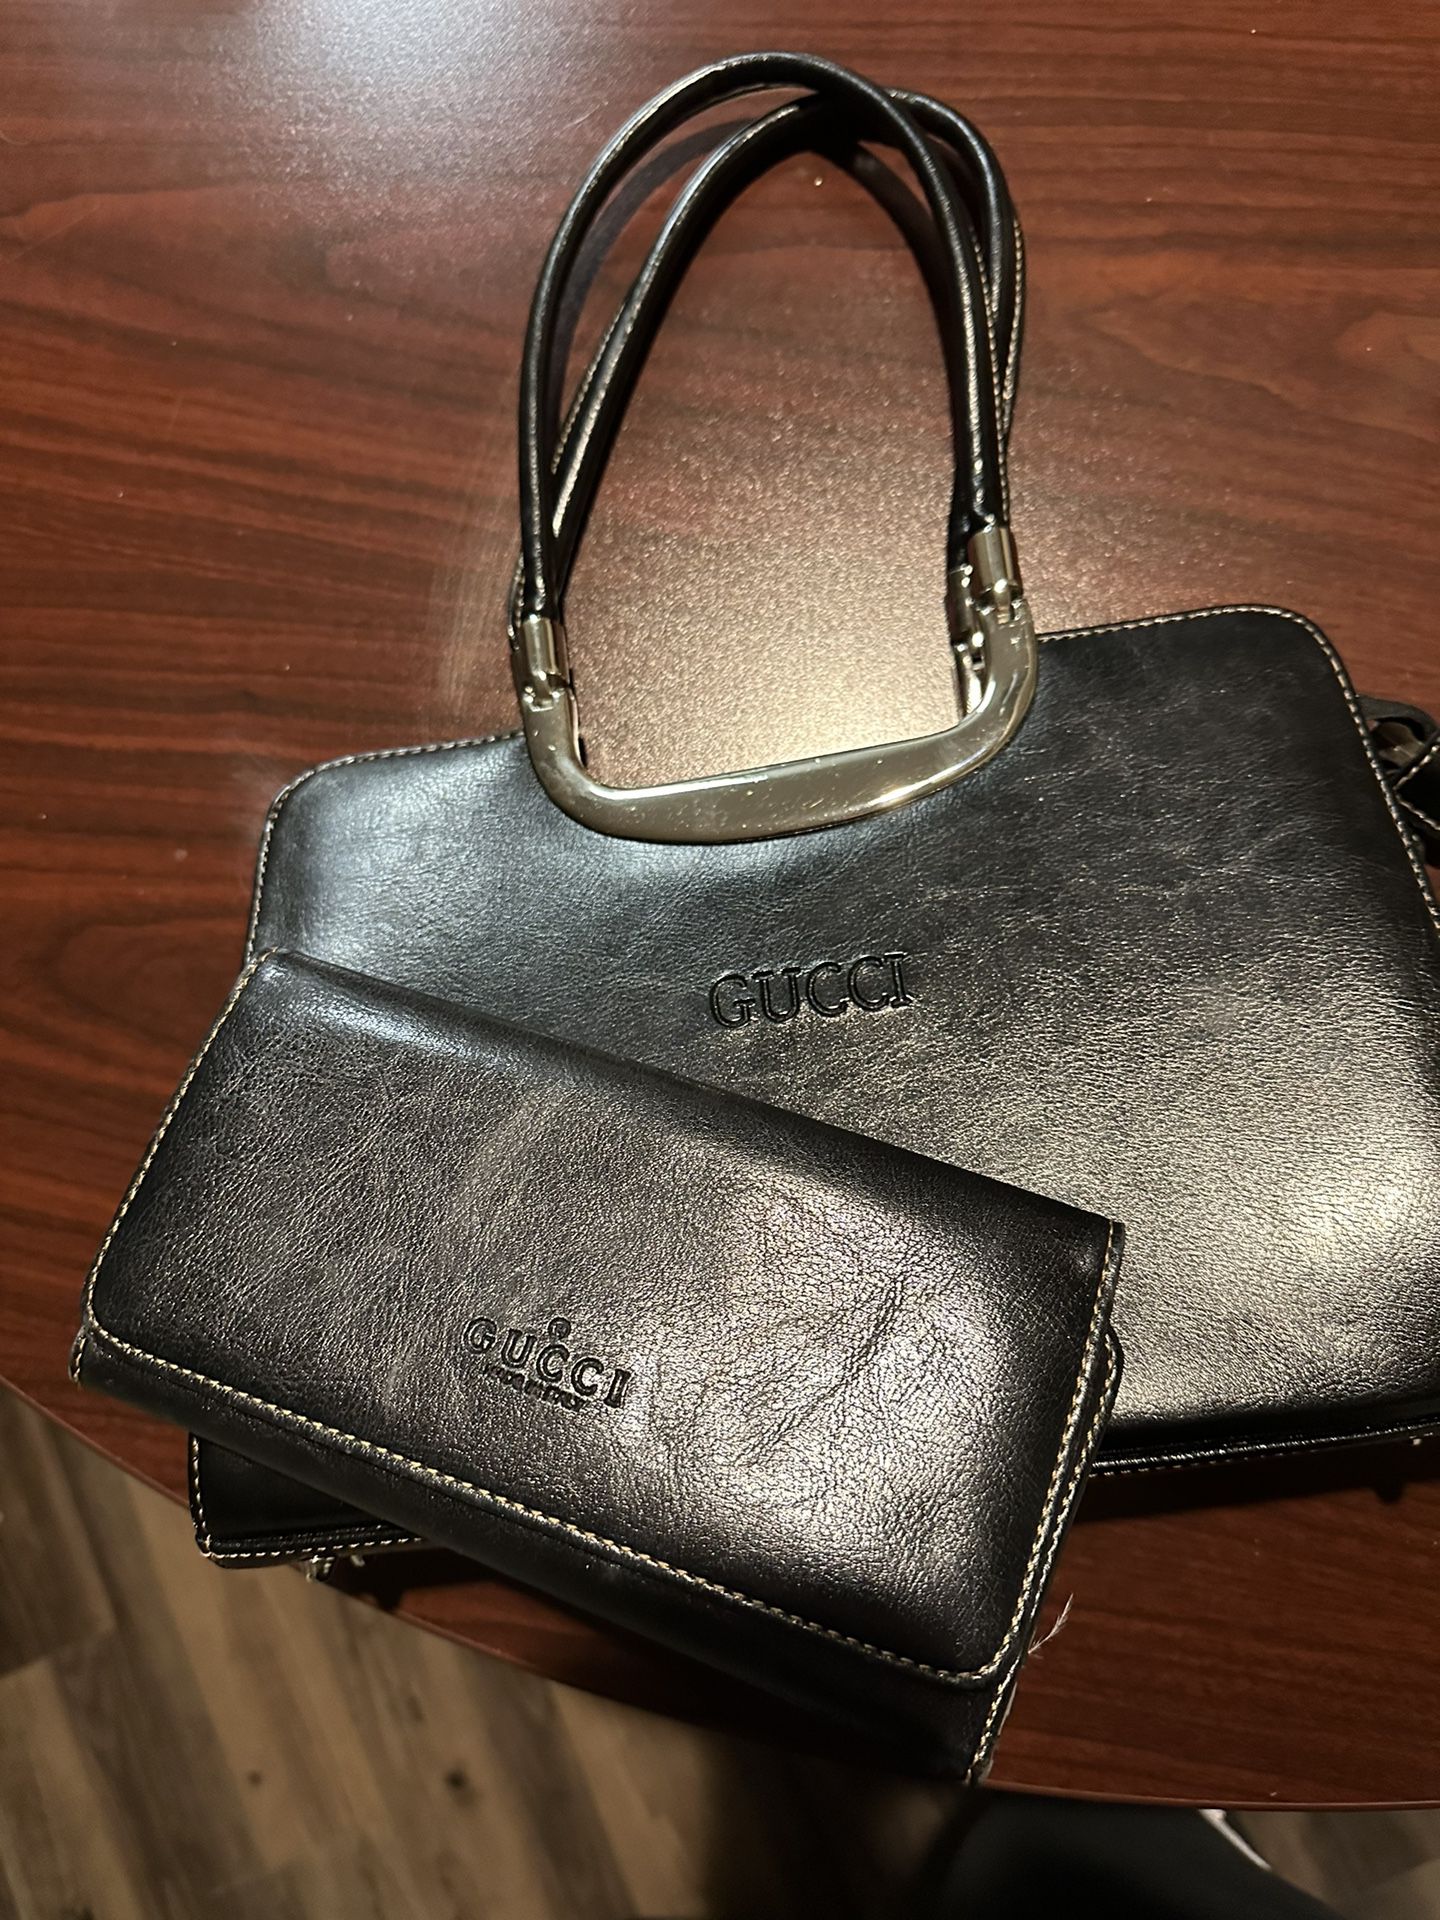 Gucci Purse And Matching Wallet And Mk Purse 